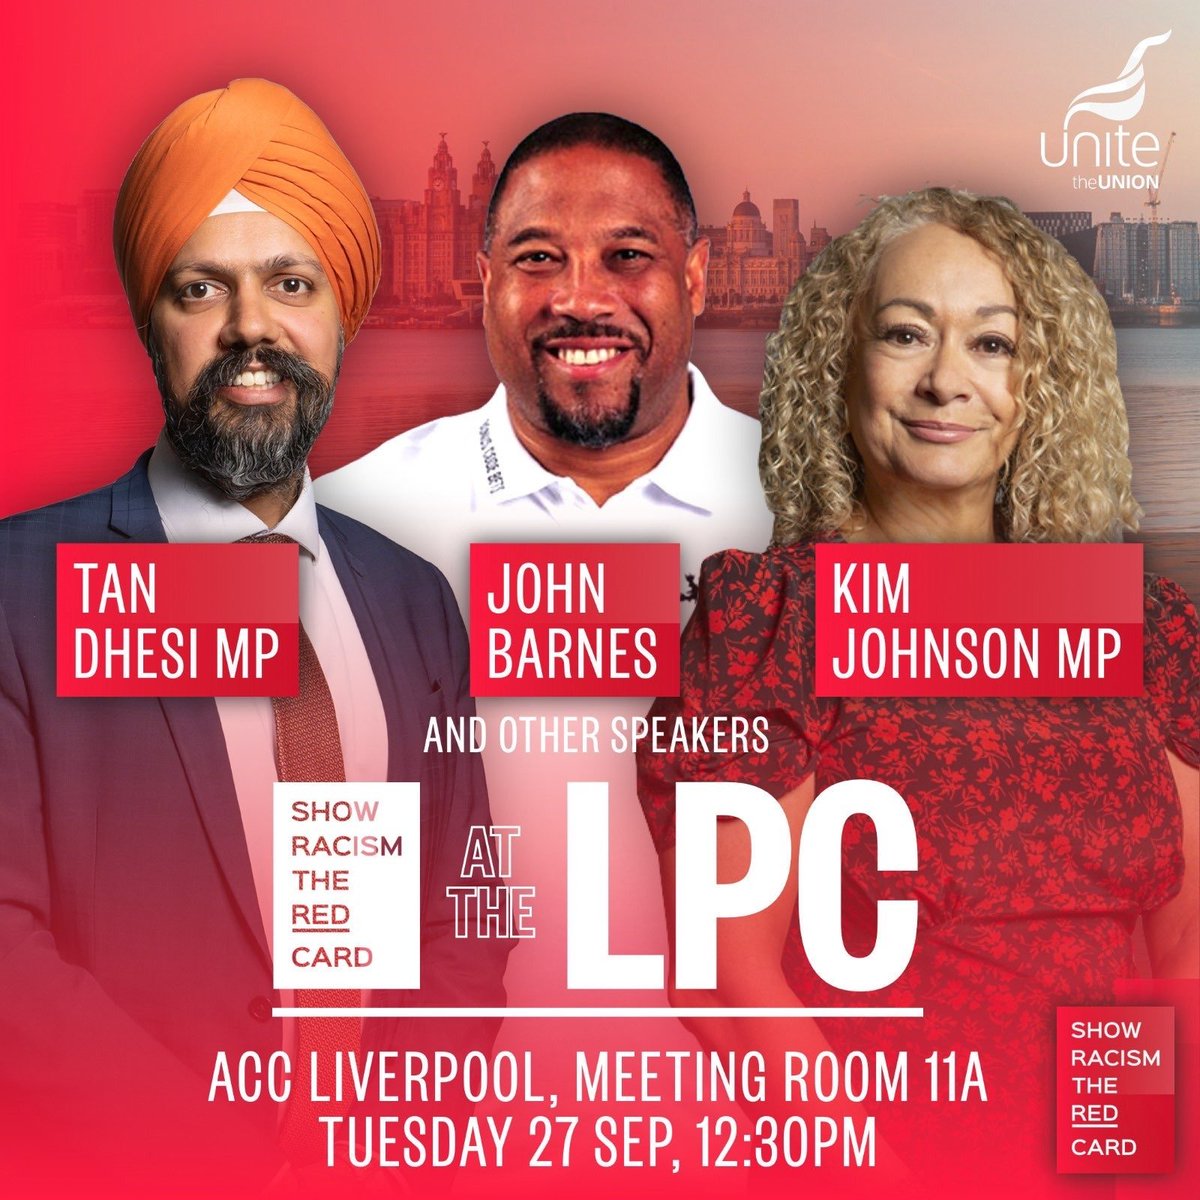 Thrilled to be joining again the legendary footballer @officialbarnesy, my good friend @KimJohnsonMP and other top speakers at @SRTRC_England #LabourConference2022 event. Hope to see some of you there, as we continue the fight to overcome #racism.